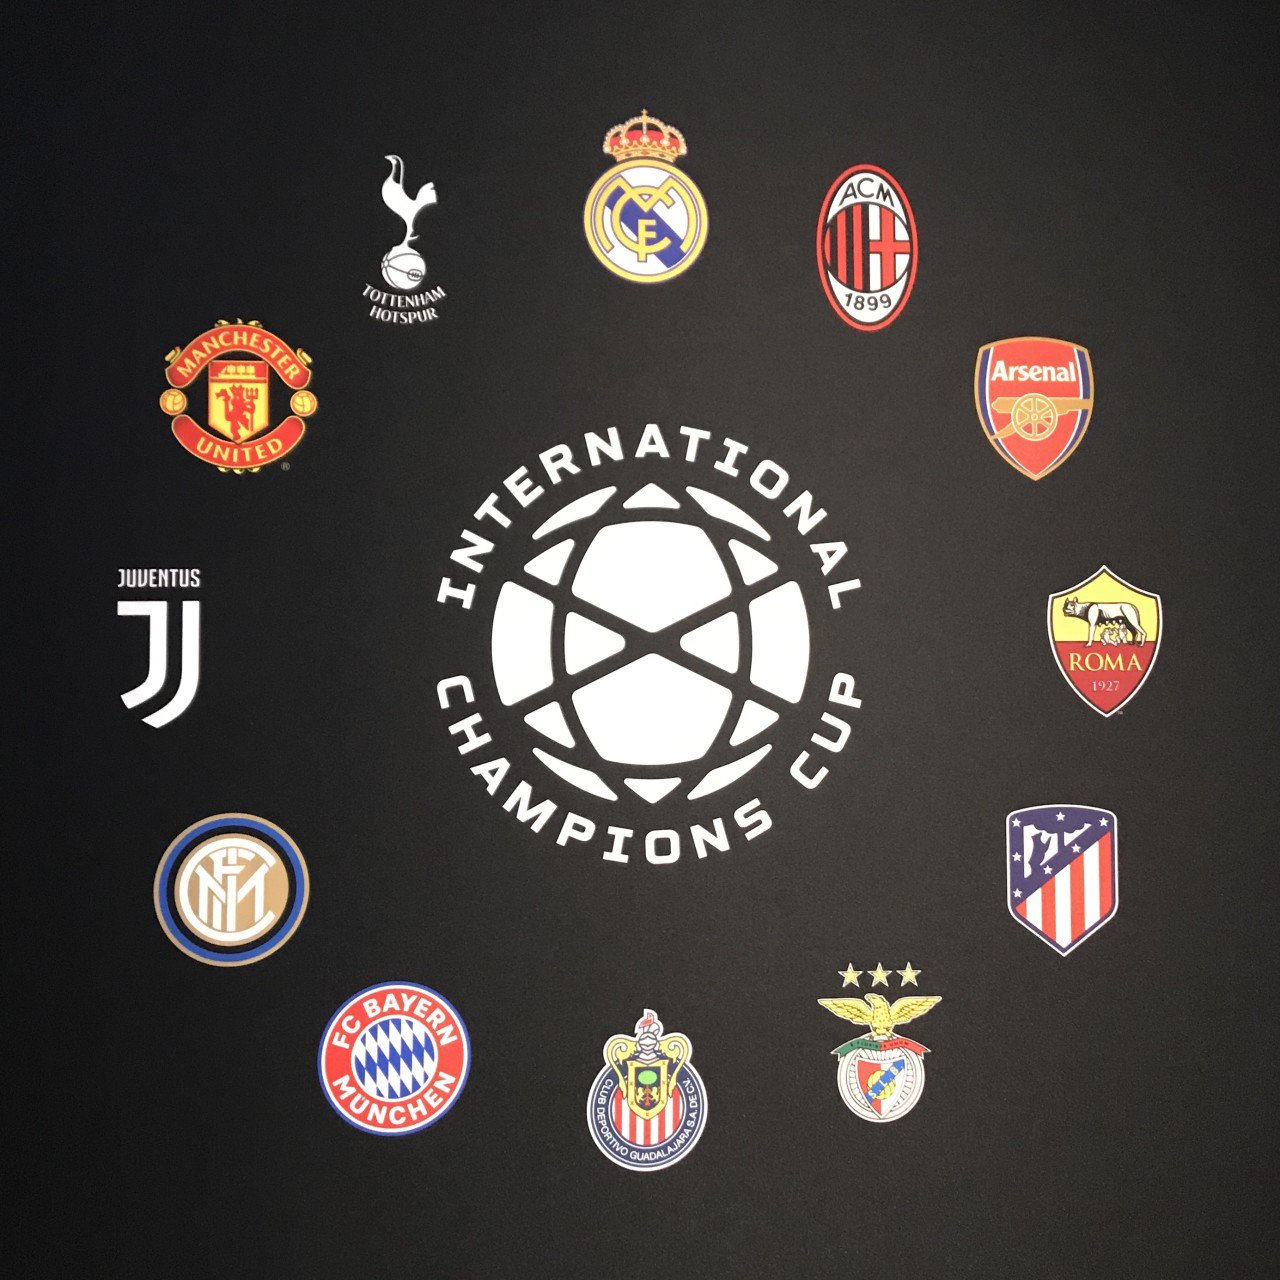 Ryd op Urter Pogo stick spring International Champions Cup on Twitter: "We're ready for the #ICC2019  launch. Are you? ⠀⠀⠀⠀⠀⠀⠀⠀ Tune in at 10am EST on Facebook Live for the full  schedule announcement 👀 ⠀⠀⠀⠀⠀⠀⠀⠀ #ChampionsMeetHere  https://t.co/ijIT16Upod" /